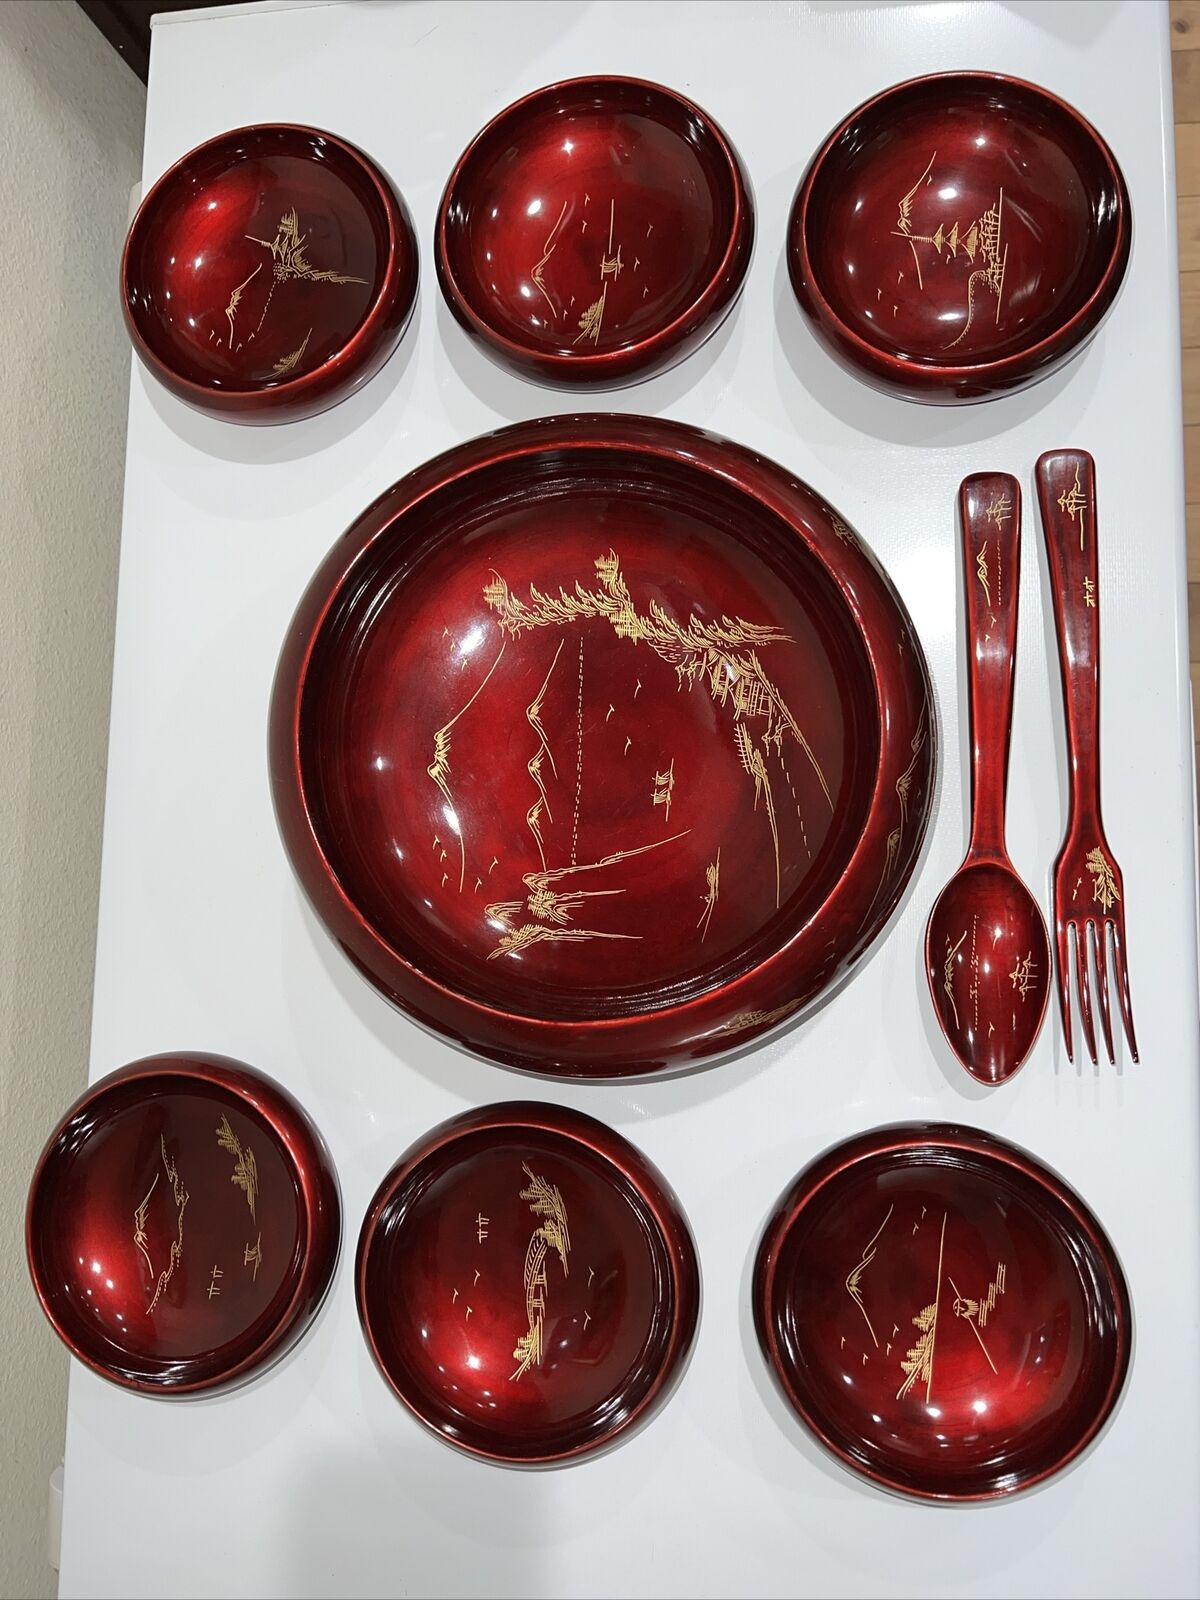 VINTAGE LARGE LACQUER WOOD 9 PC JAPANESE HAND PAINTED SALAD RICE BOWL SET